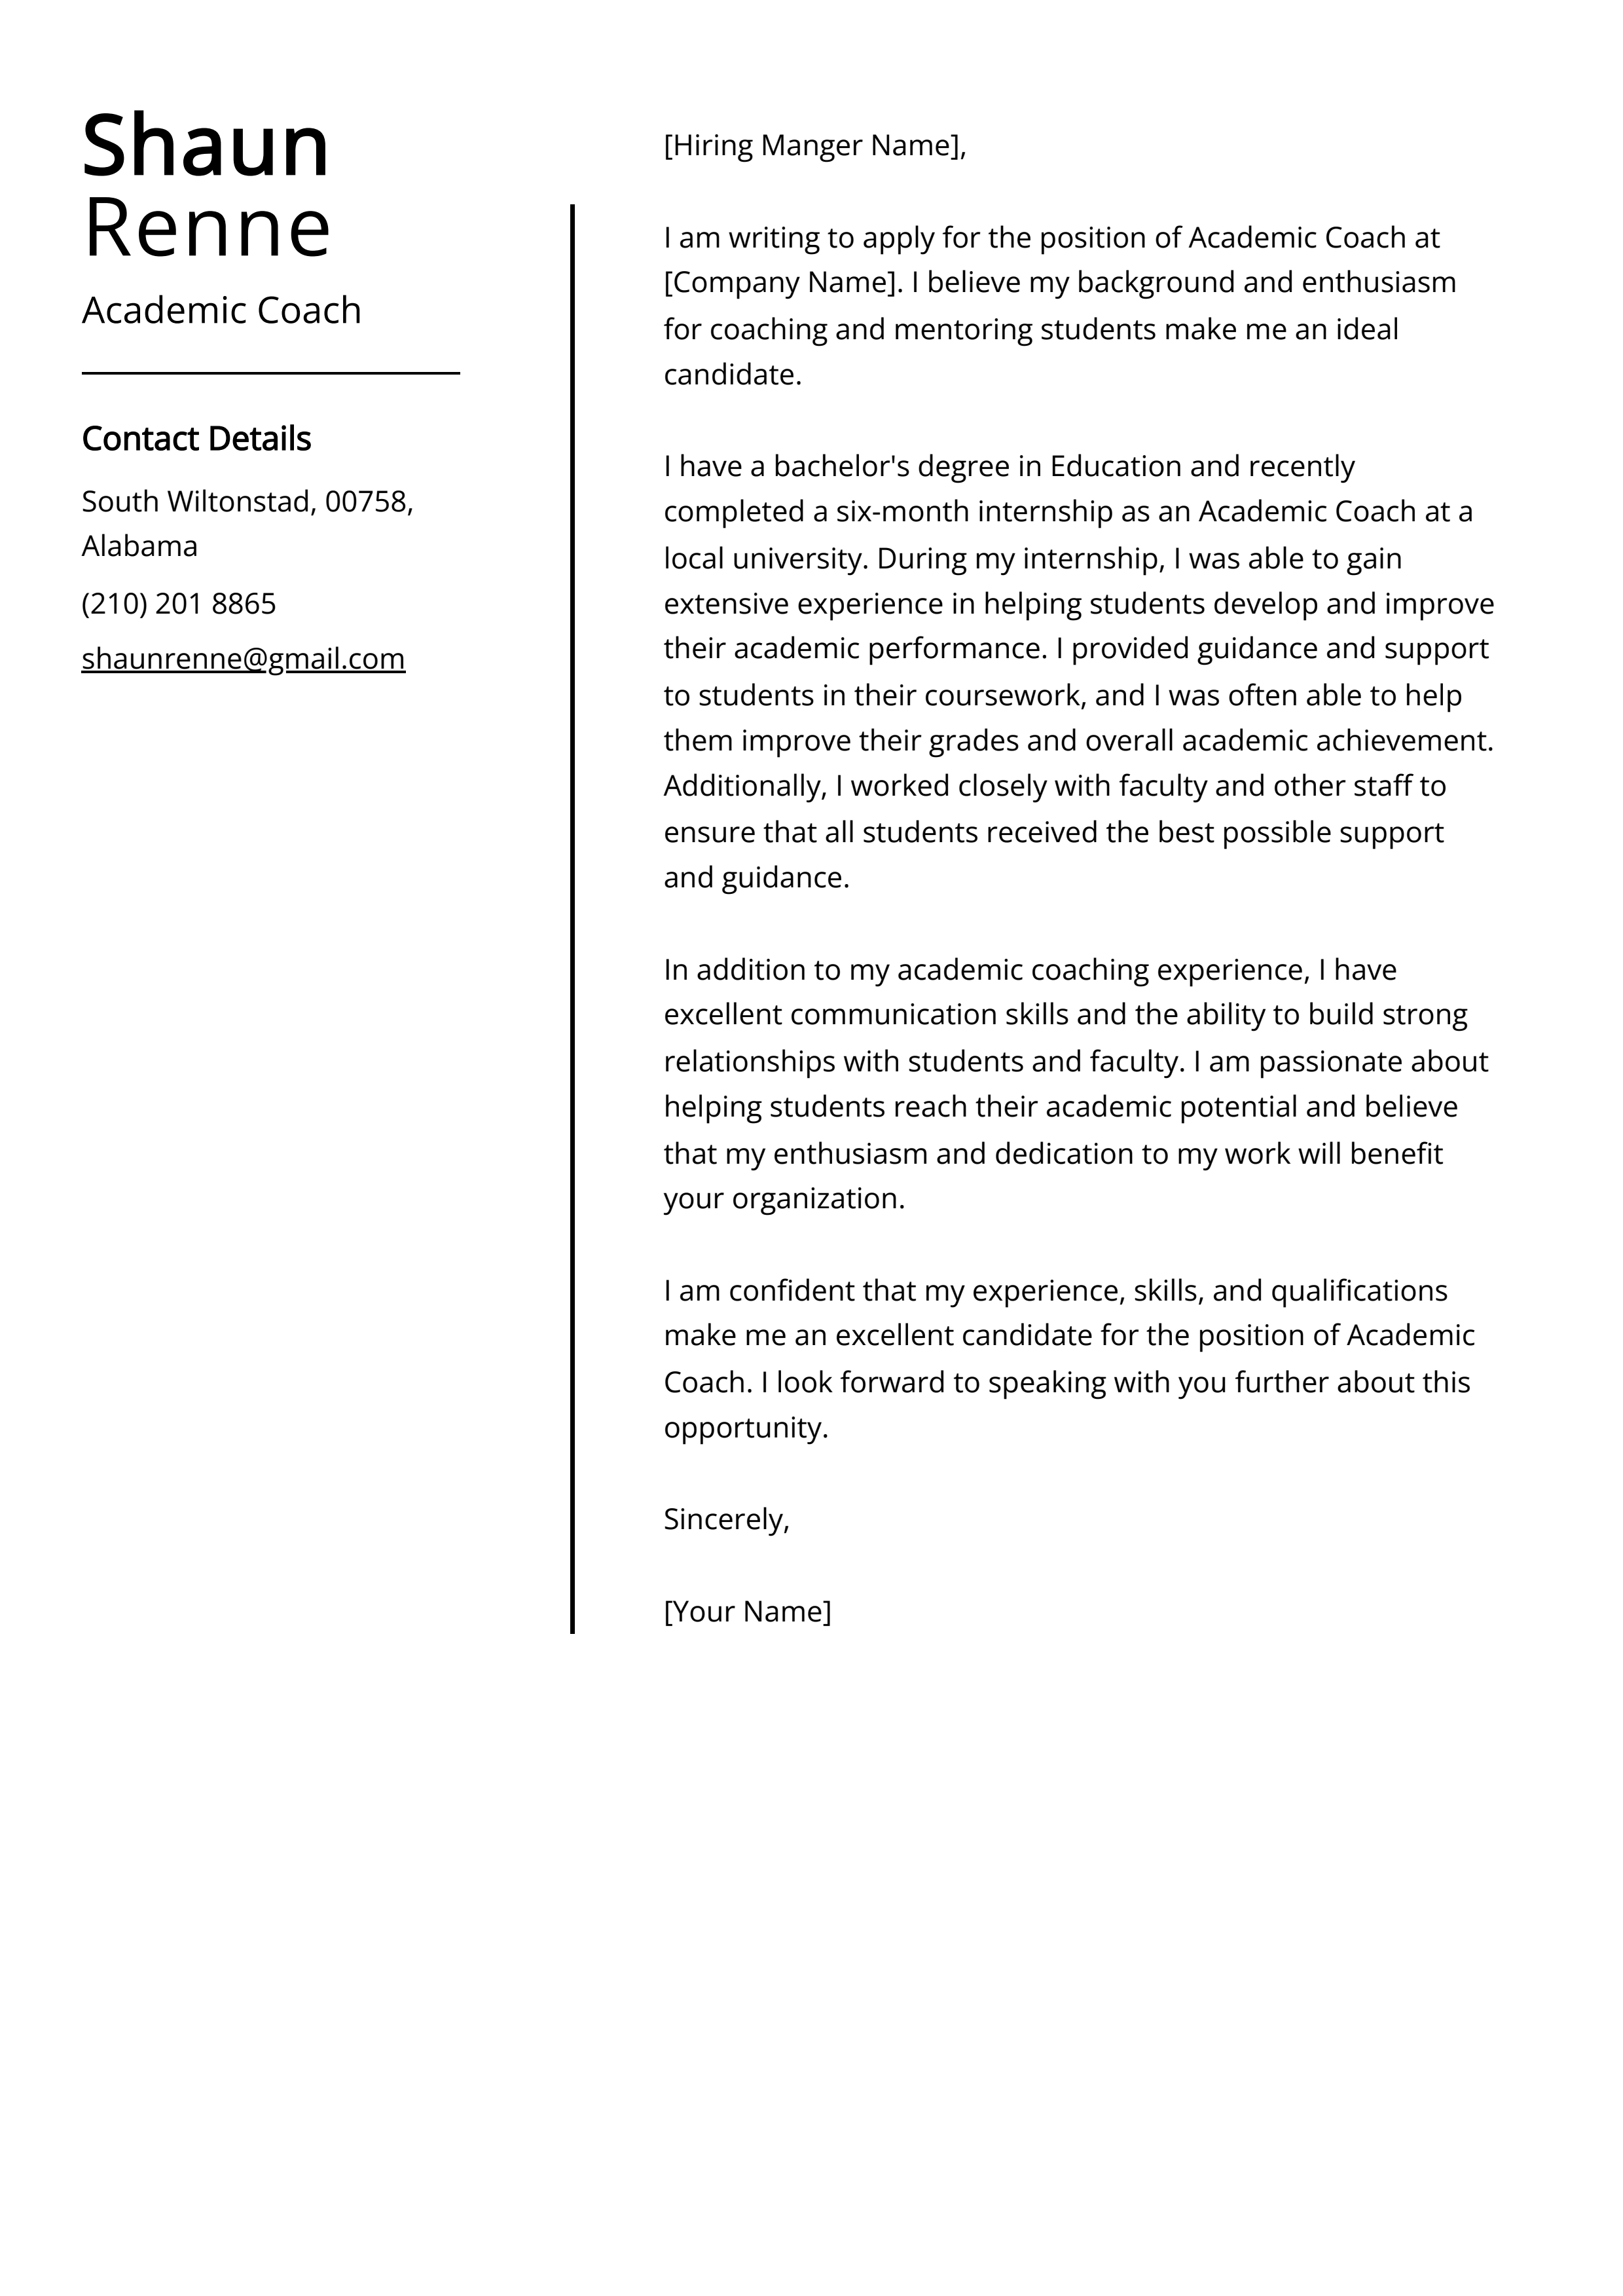 Academic Coach Cover Letter Example